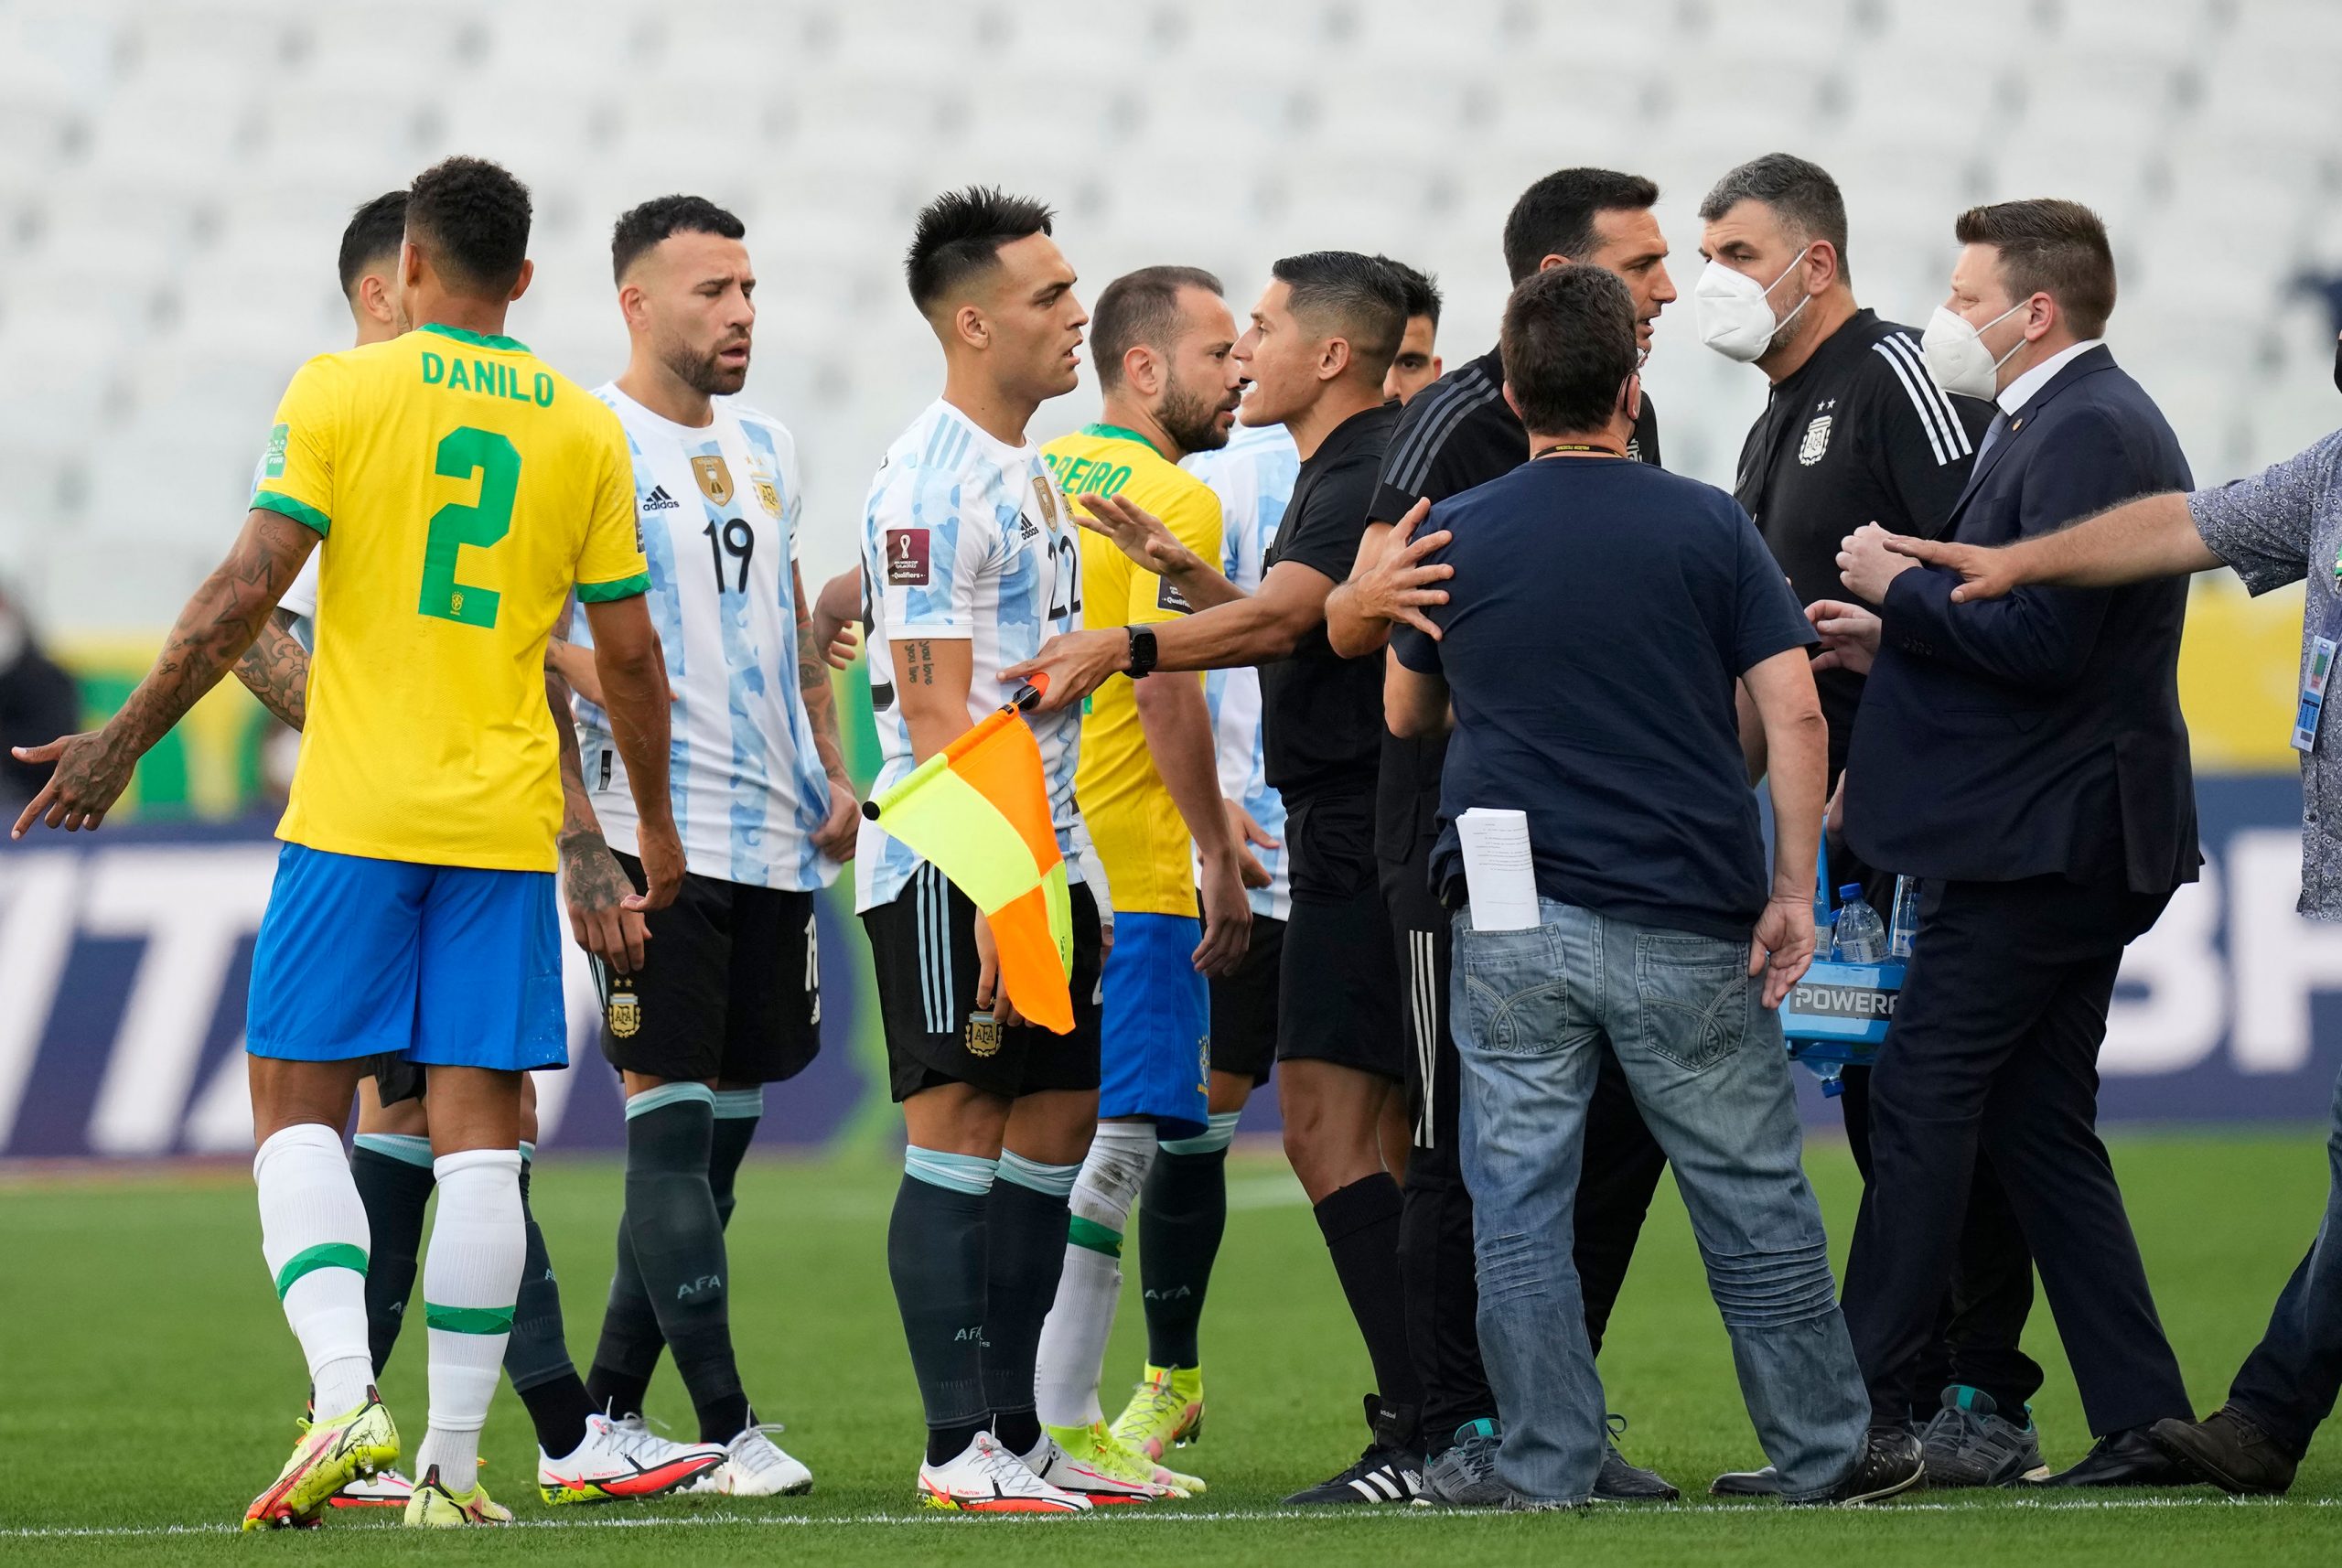 Brazil vs Argentina World Cup qualifier suspended: What we know so far